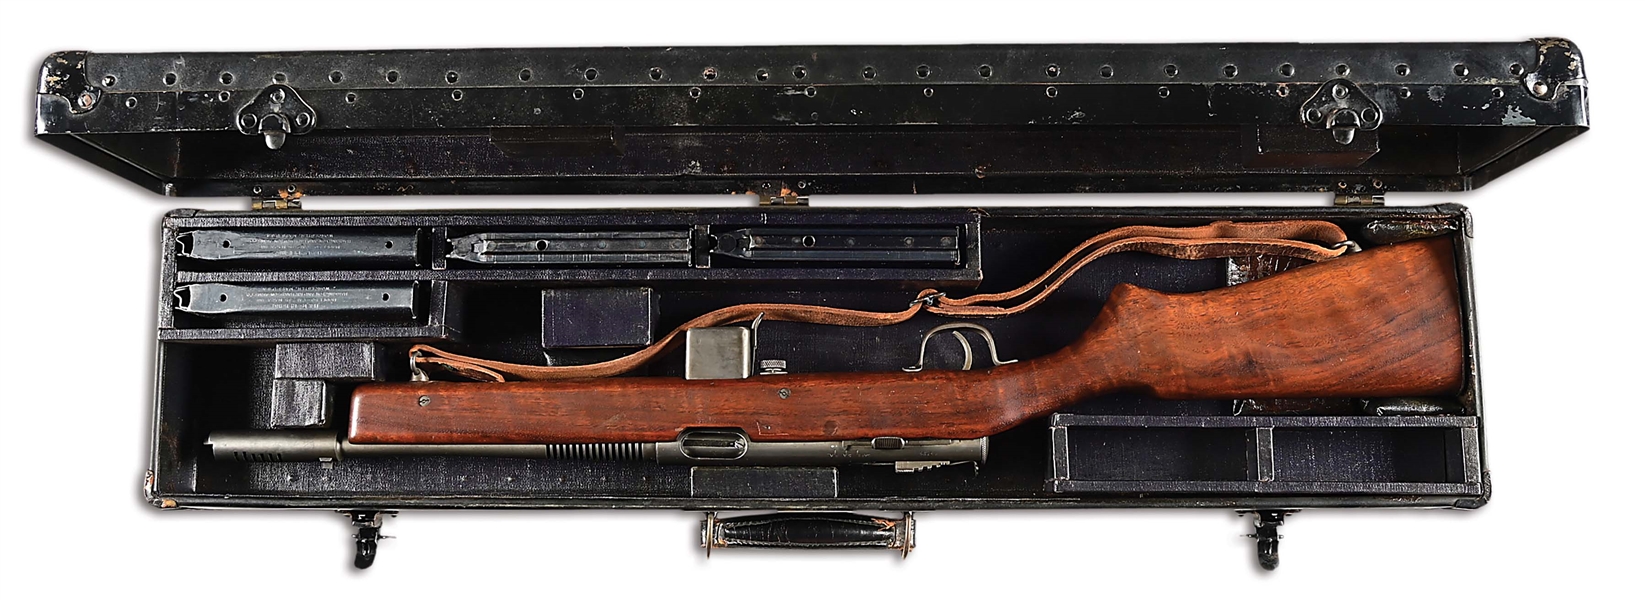 (N) HARRINGTON AND RICHARDSON REISING MODEL 50 MACHINE GUN WITH FABULOUS WOOD AND ORIGINAL TRUNK CASE (CURIO AND RELIC).